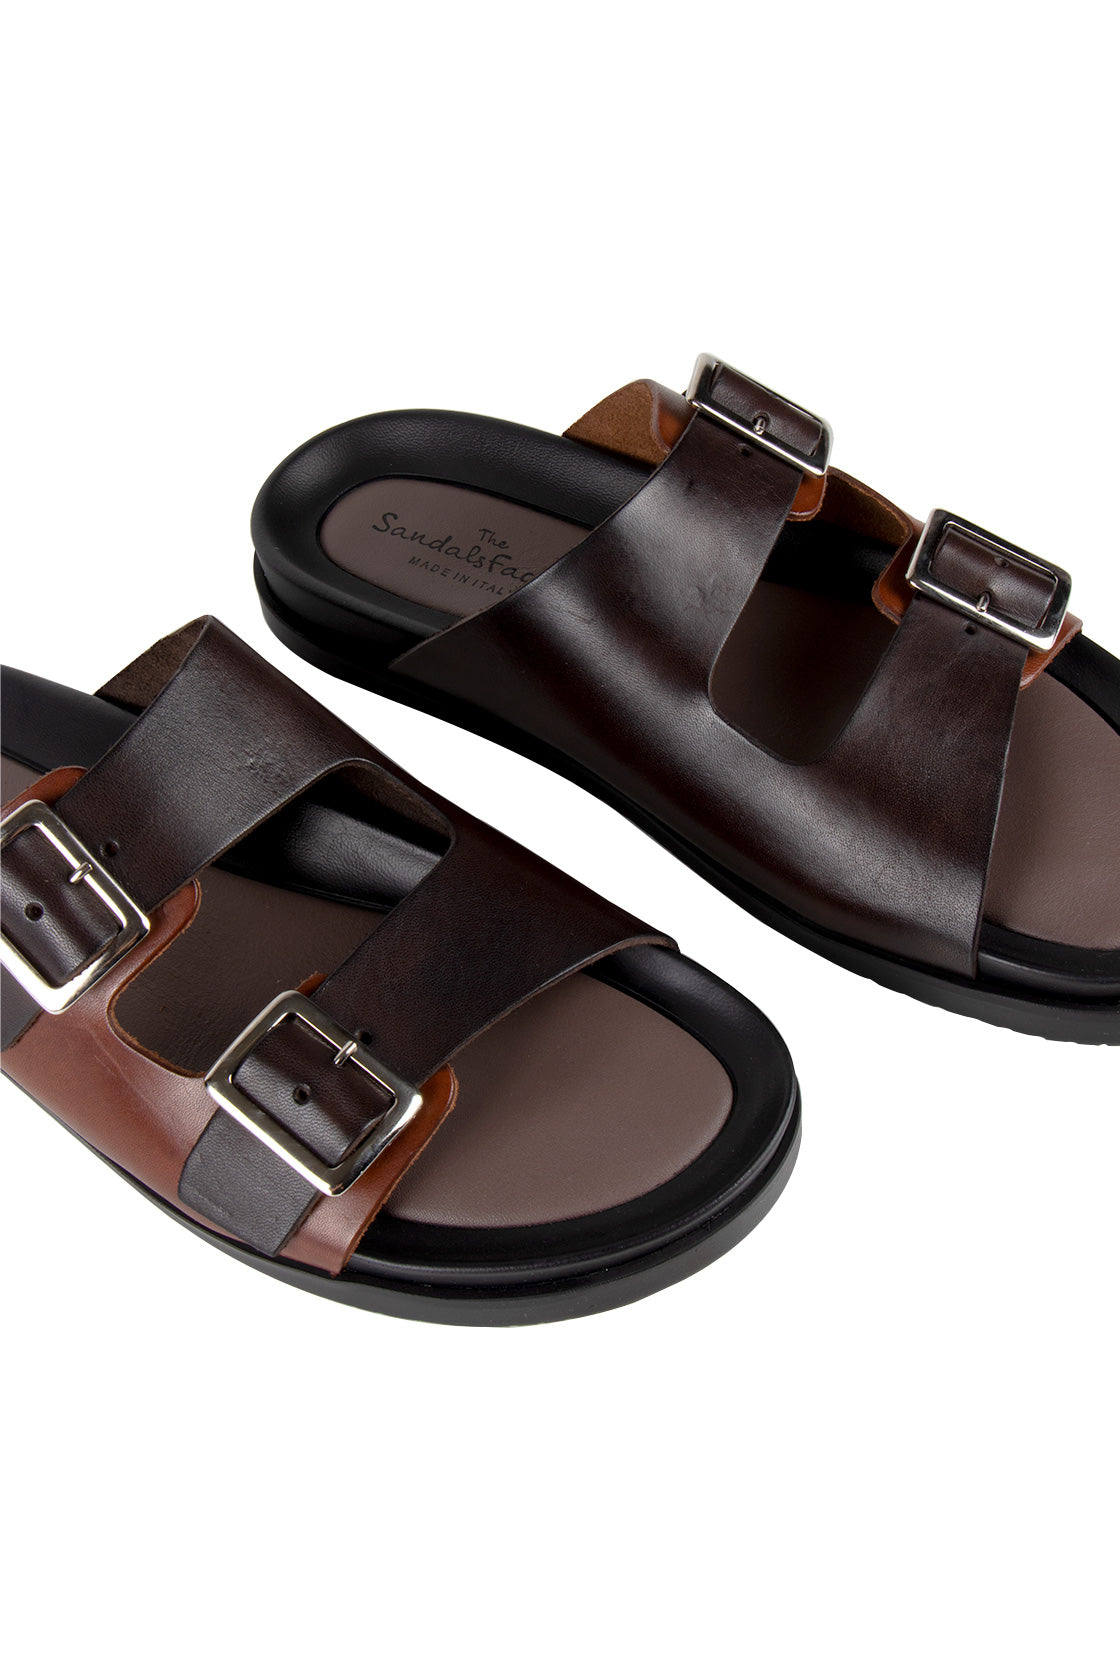 The Sandal Factory Leather Sandals Brown/Tan